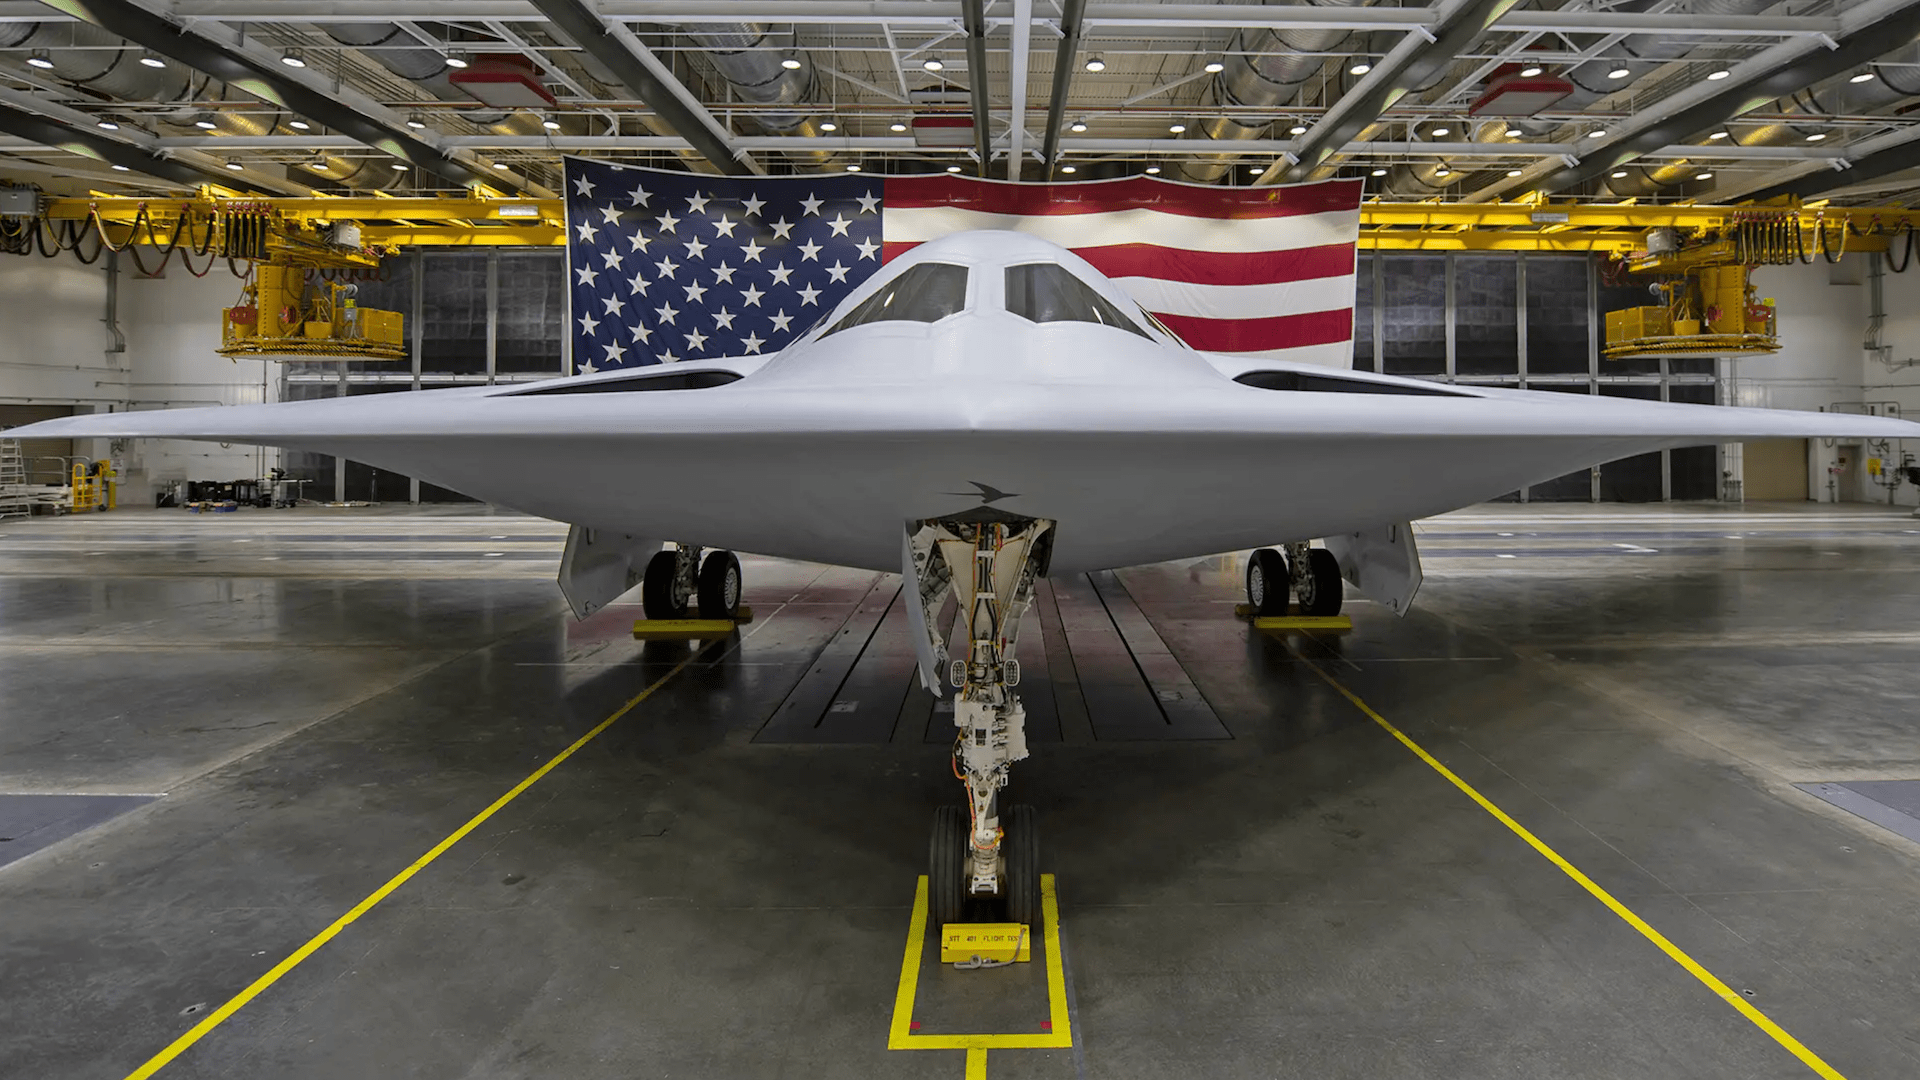 Here’s your first look at the new B-21 Raider stealth bomber